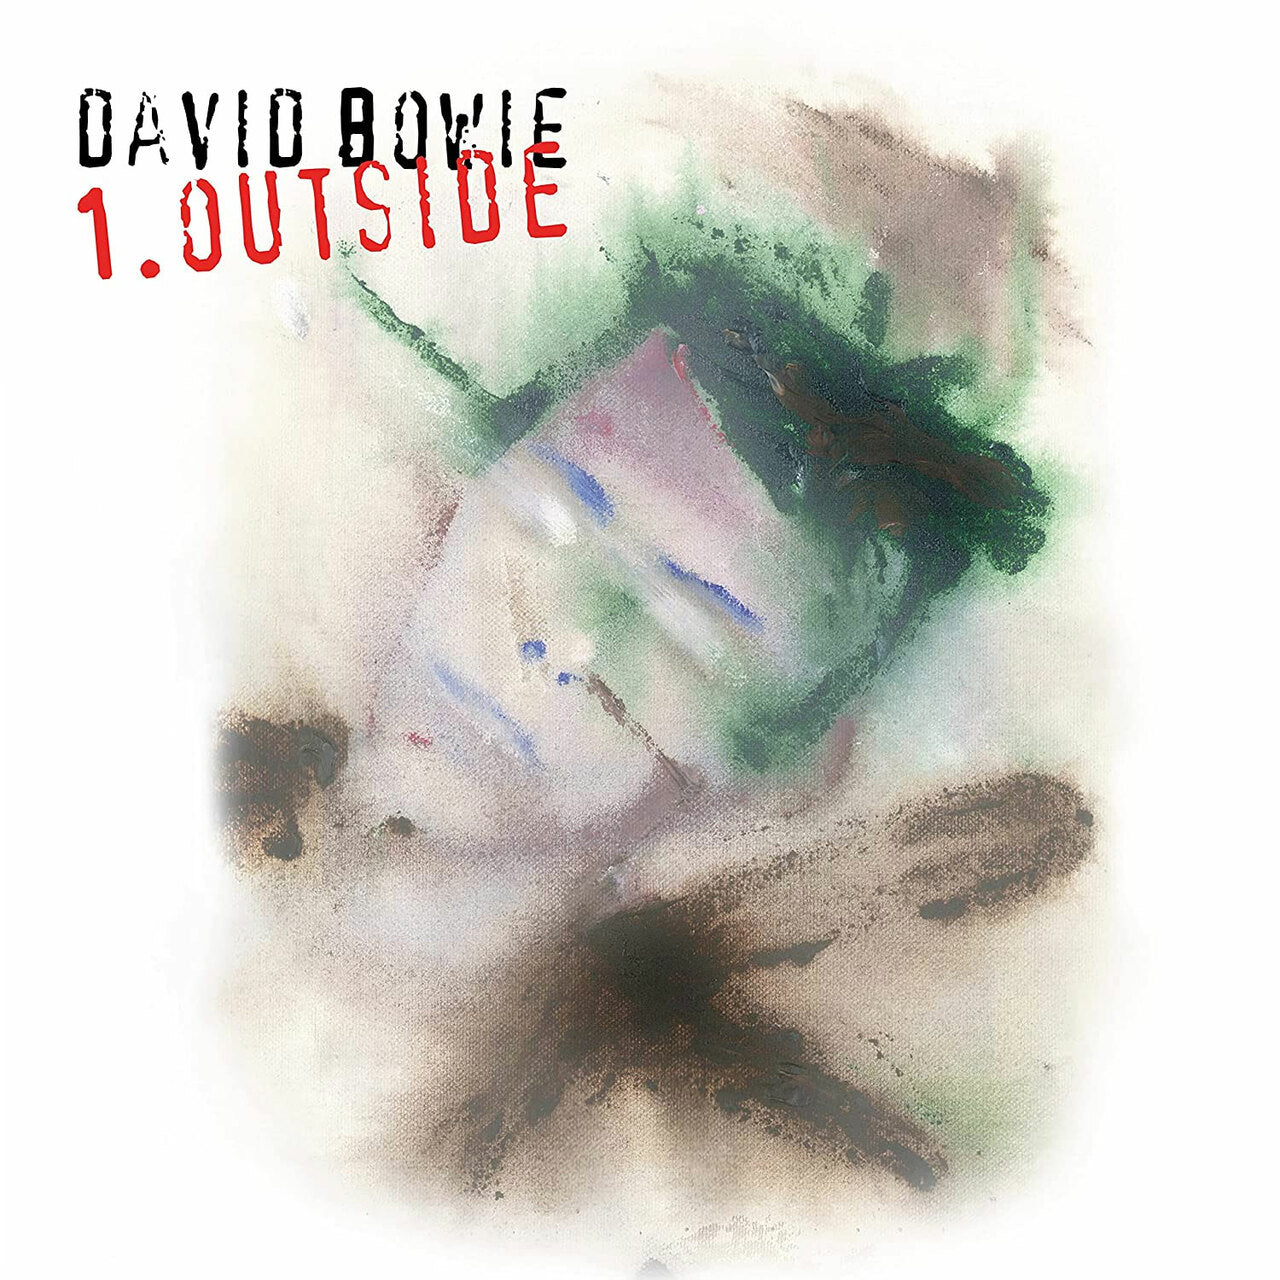 David Bowie - 1. Outside (The Nathan Adler Diaries: A Hyper-cycle) - LP